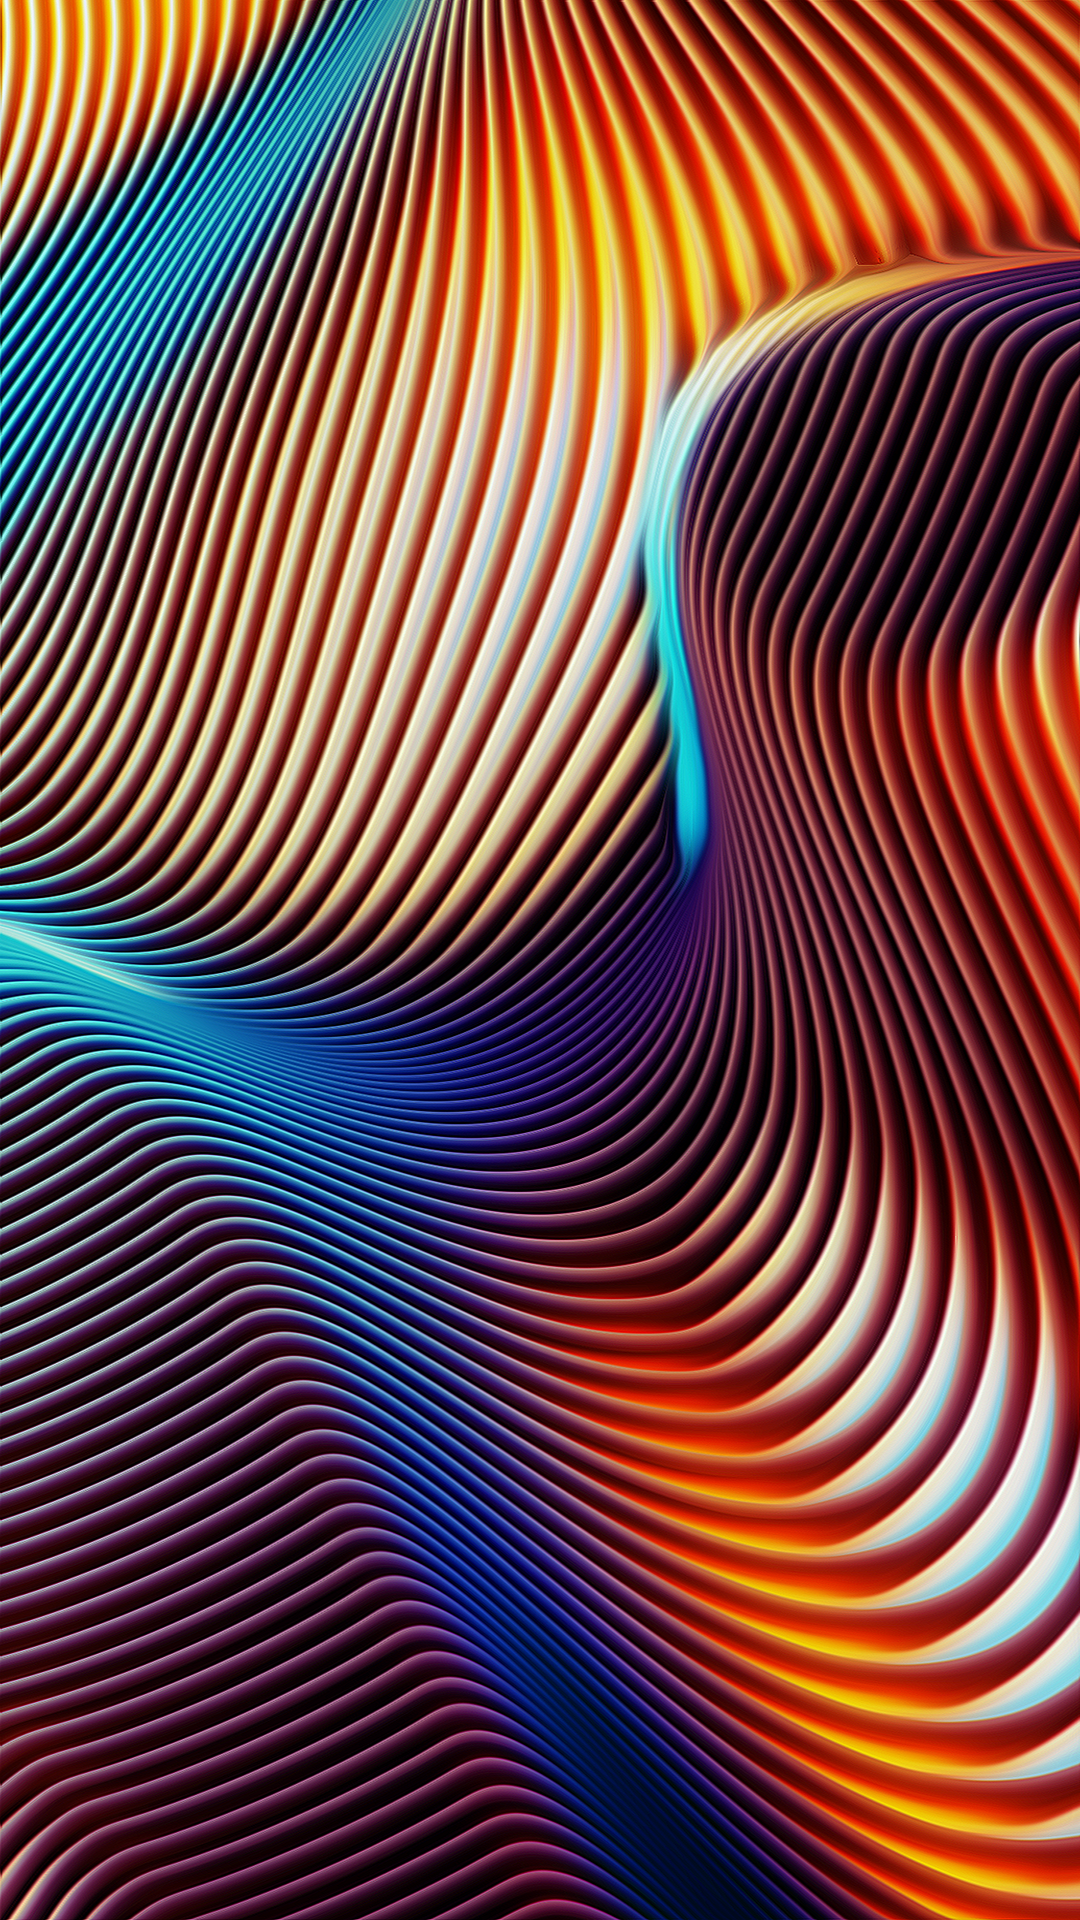 New MacBook Pro-inspired wallpapers for iPhone